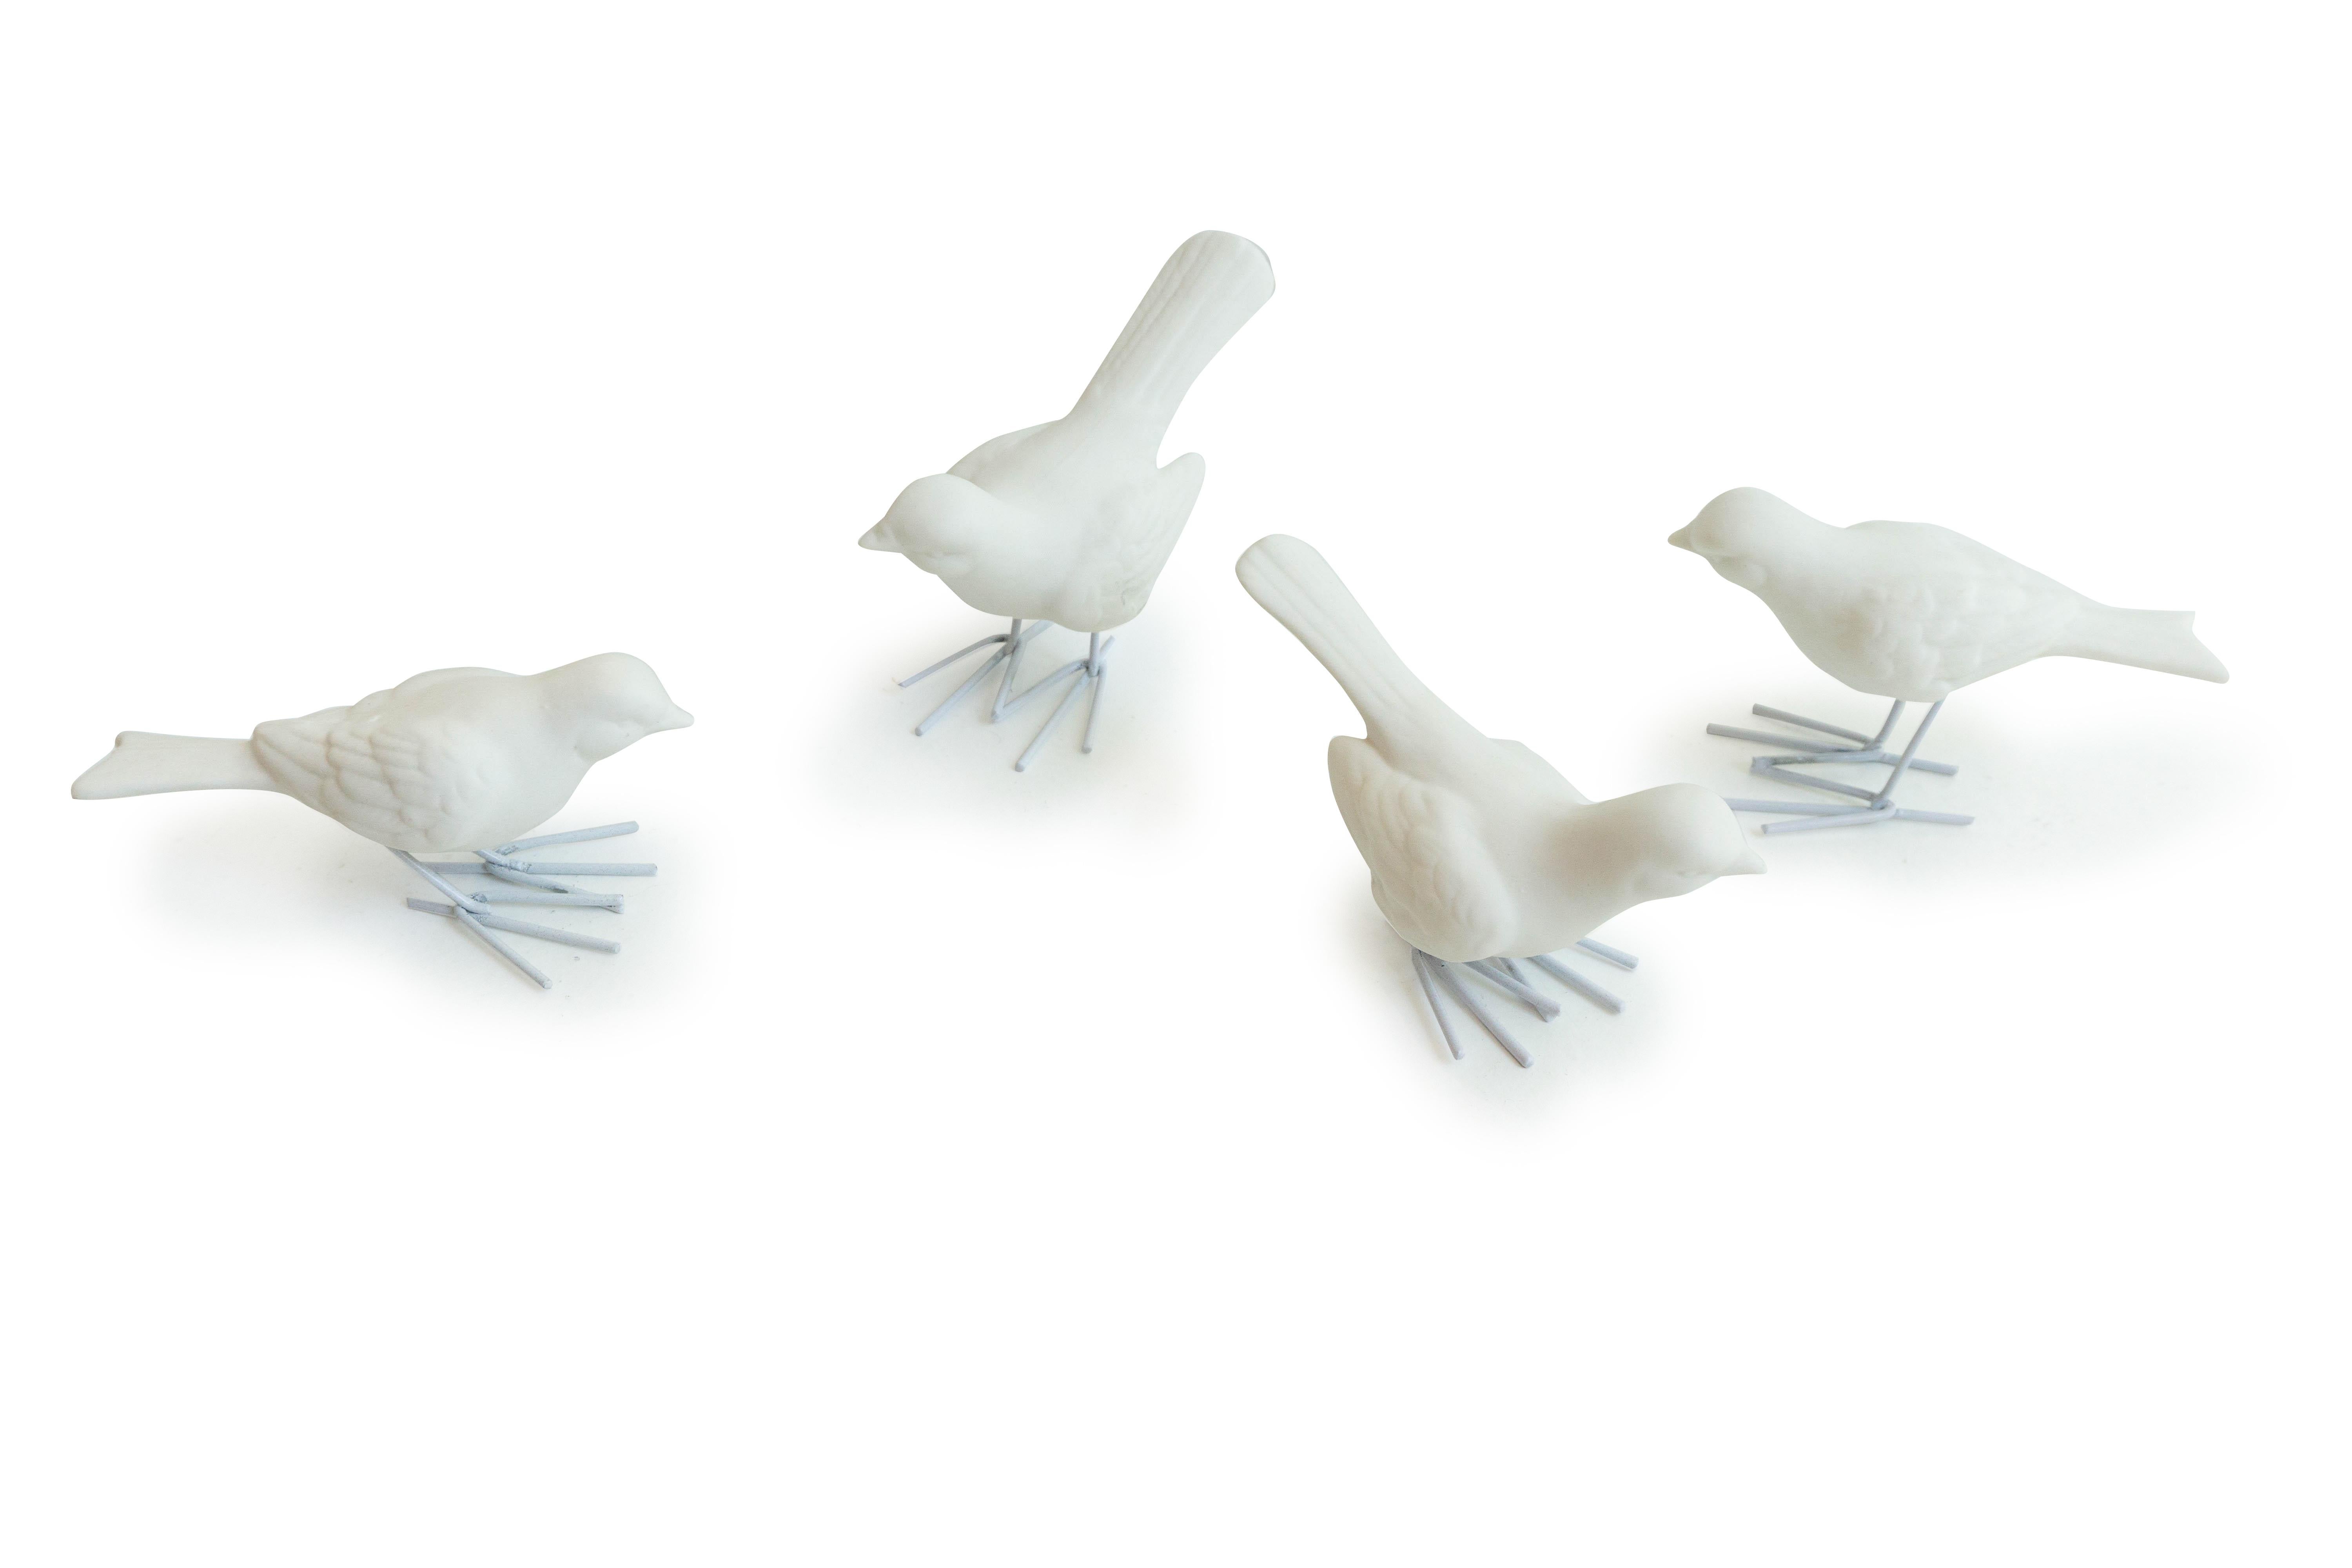 A set of four unglazed white porcelain Starlings with iron legs. Perched throughout your space for a year round decoration. 

Dimensions: 5” H x 2” W x 4” L